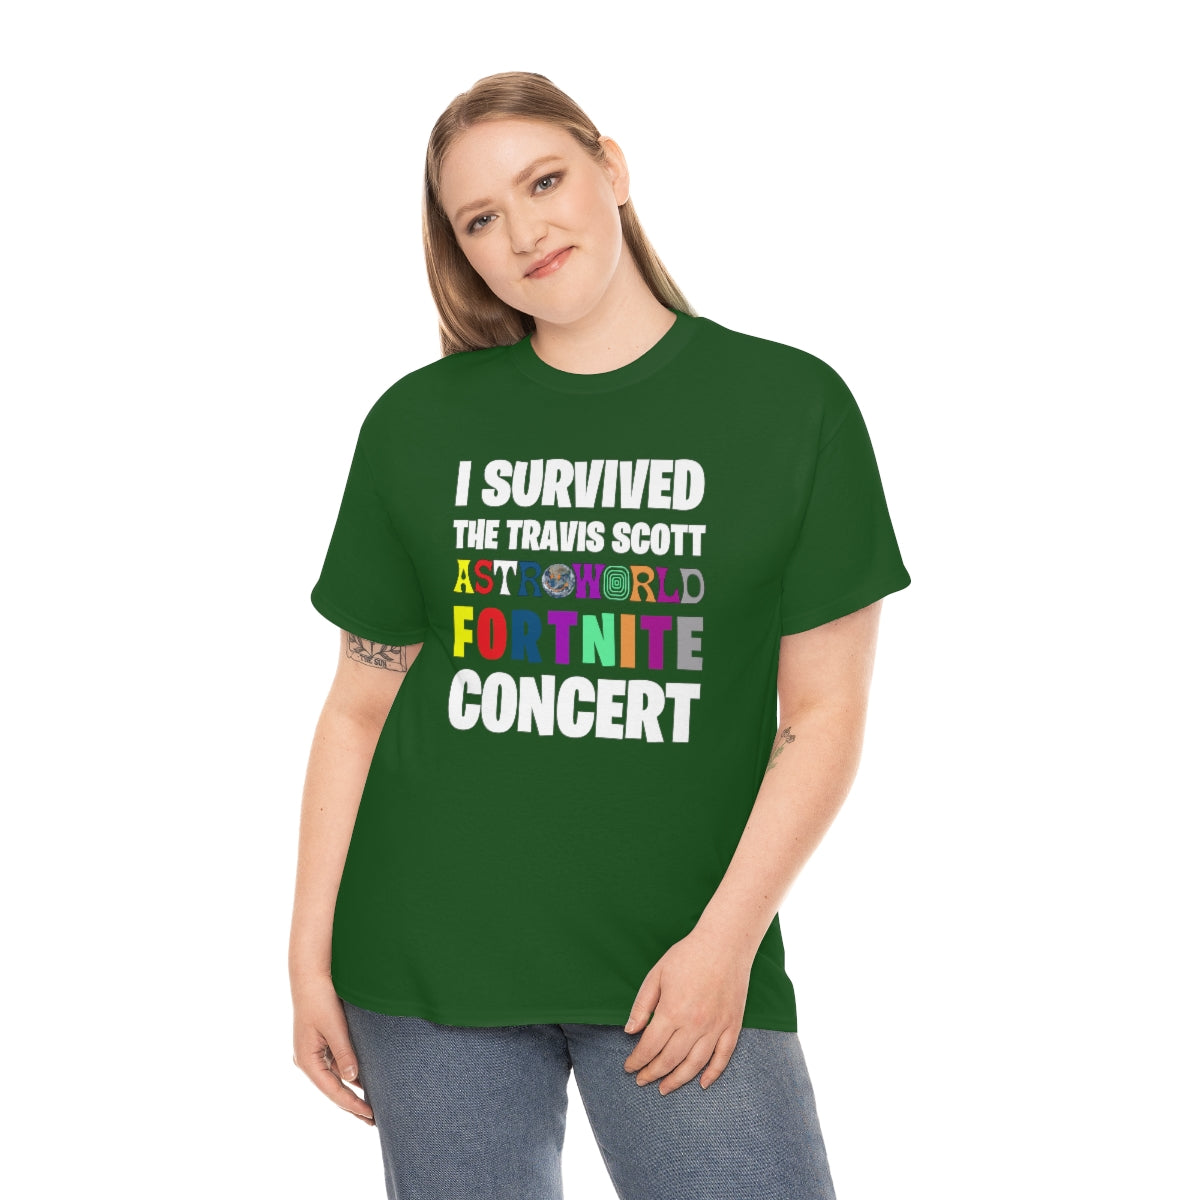 I SURVIVED THE TRAVIS SCOTT FORTNITE CONCERT - Unisex Heavy Cotton Tee - All Colors